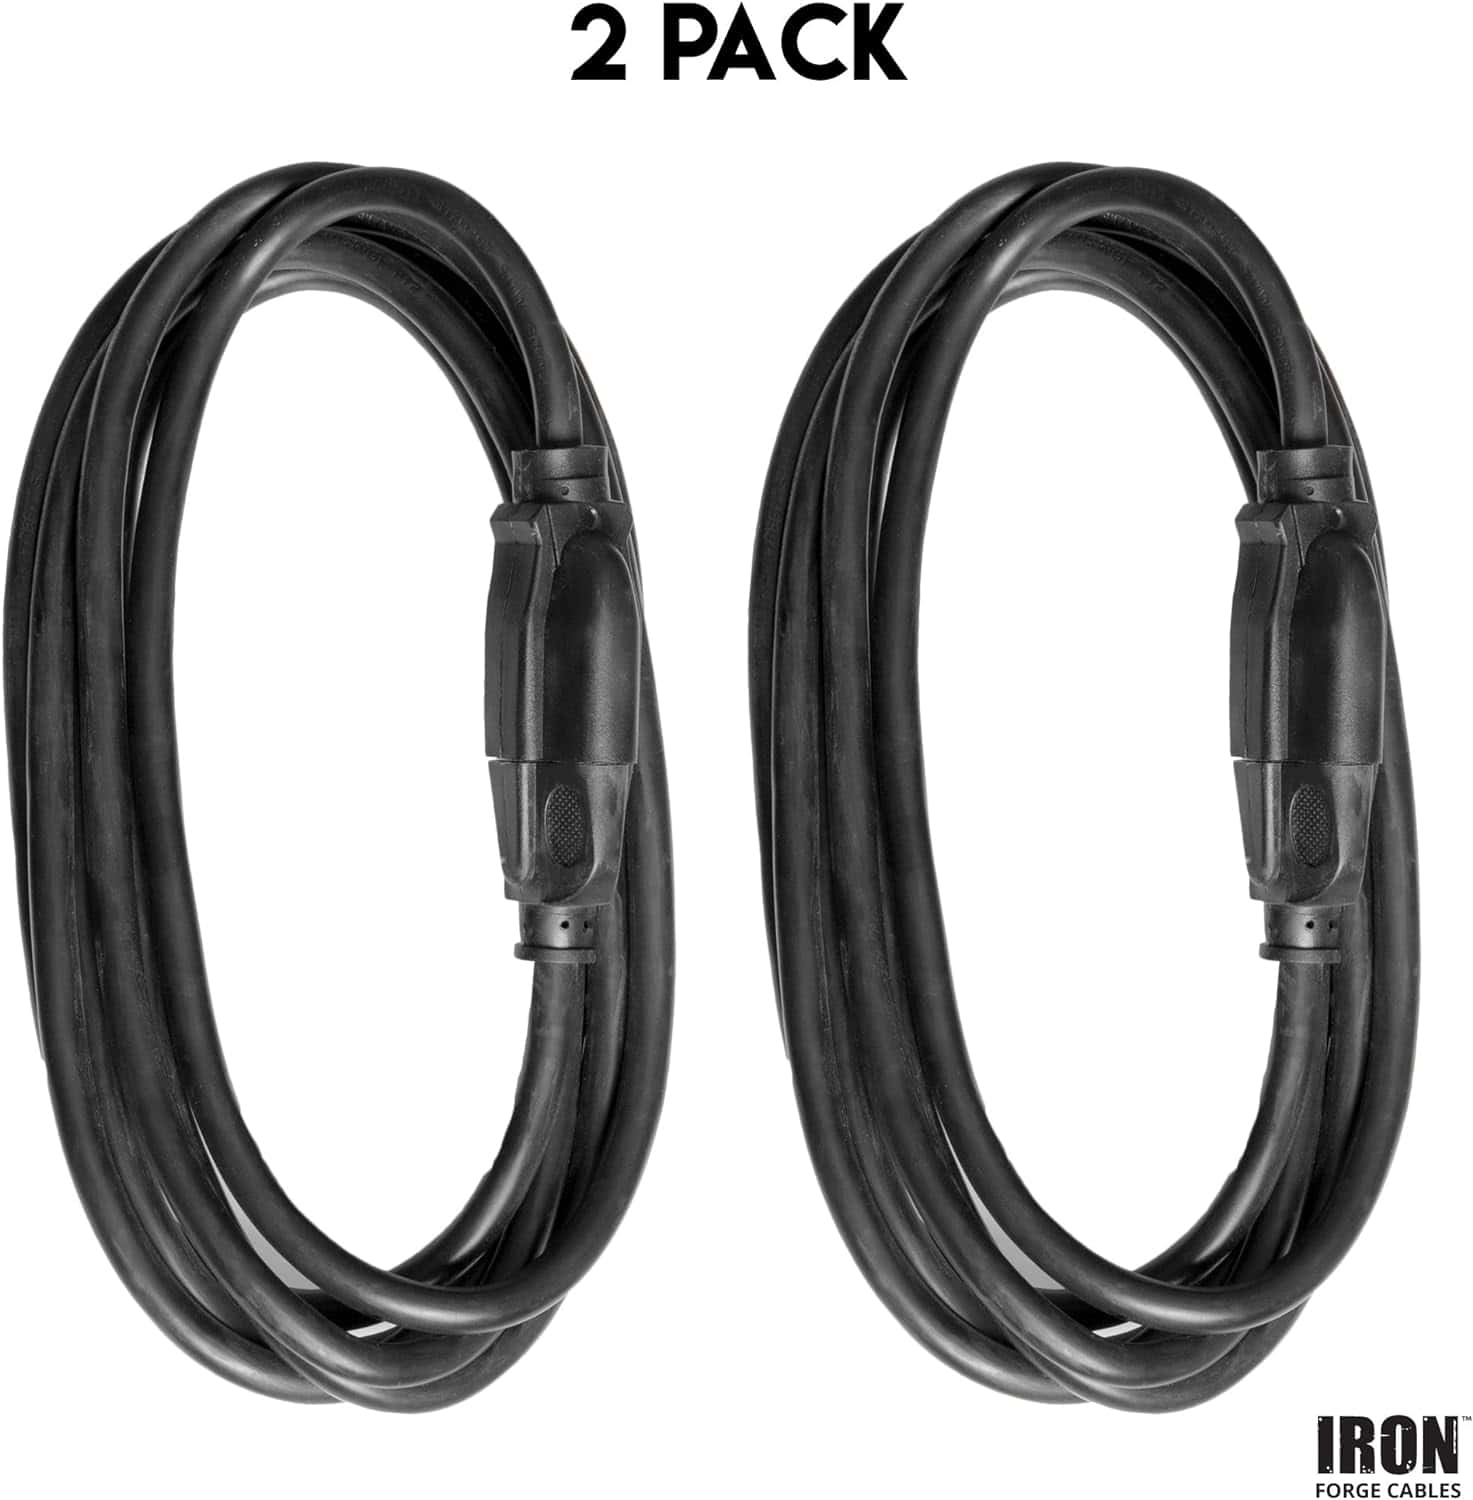 Iron-Forge-Cable-Black-Extension-Cord-10-Ft-2-Pack-16-3-Outdoor-Extension-Cord-3-Prong-13-AMP-SJTW-Weatherproof-Exterior-Power-Cable-10-Foot-Great-for-Outdoor-Lights-Decoration-Leaf-Blower